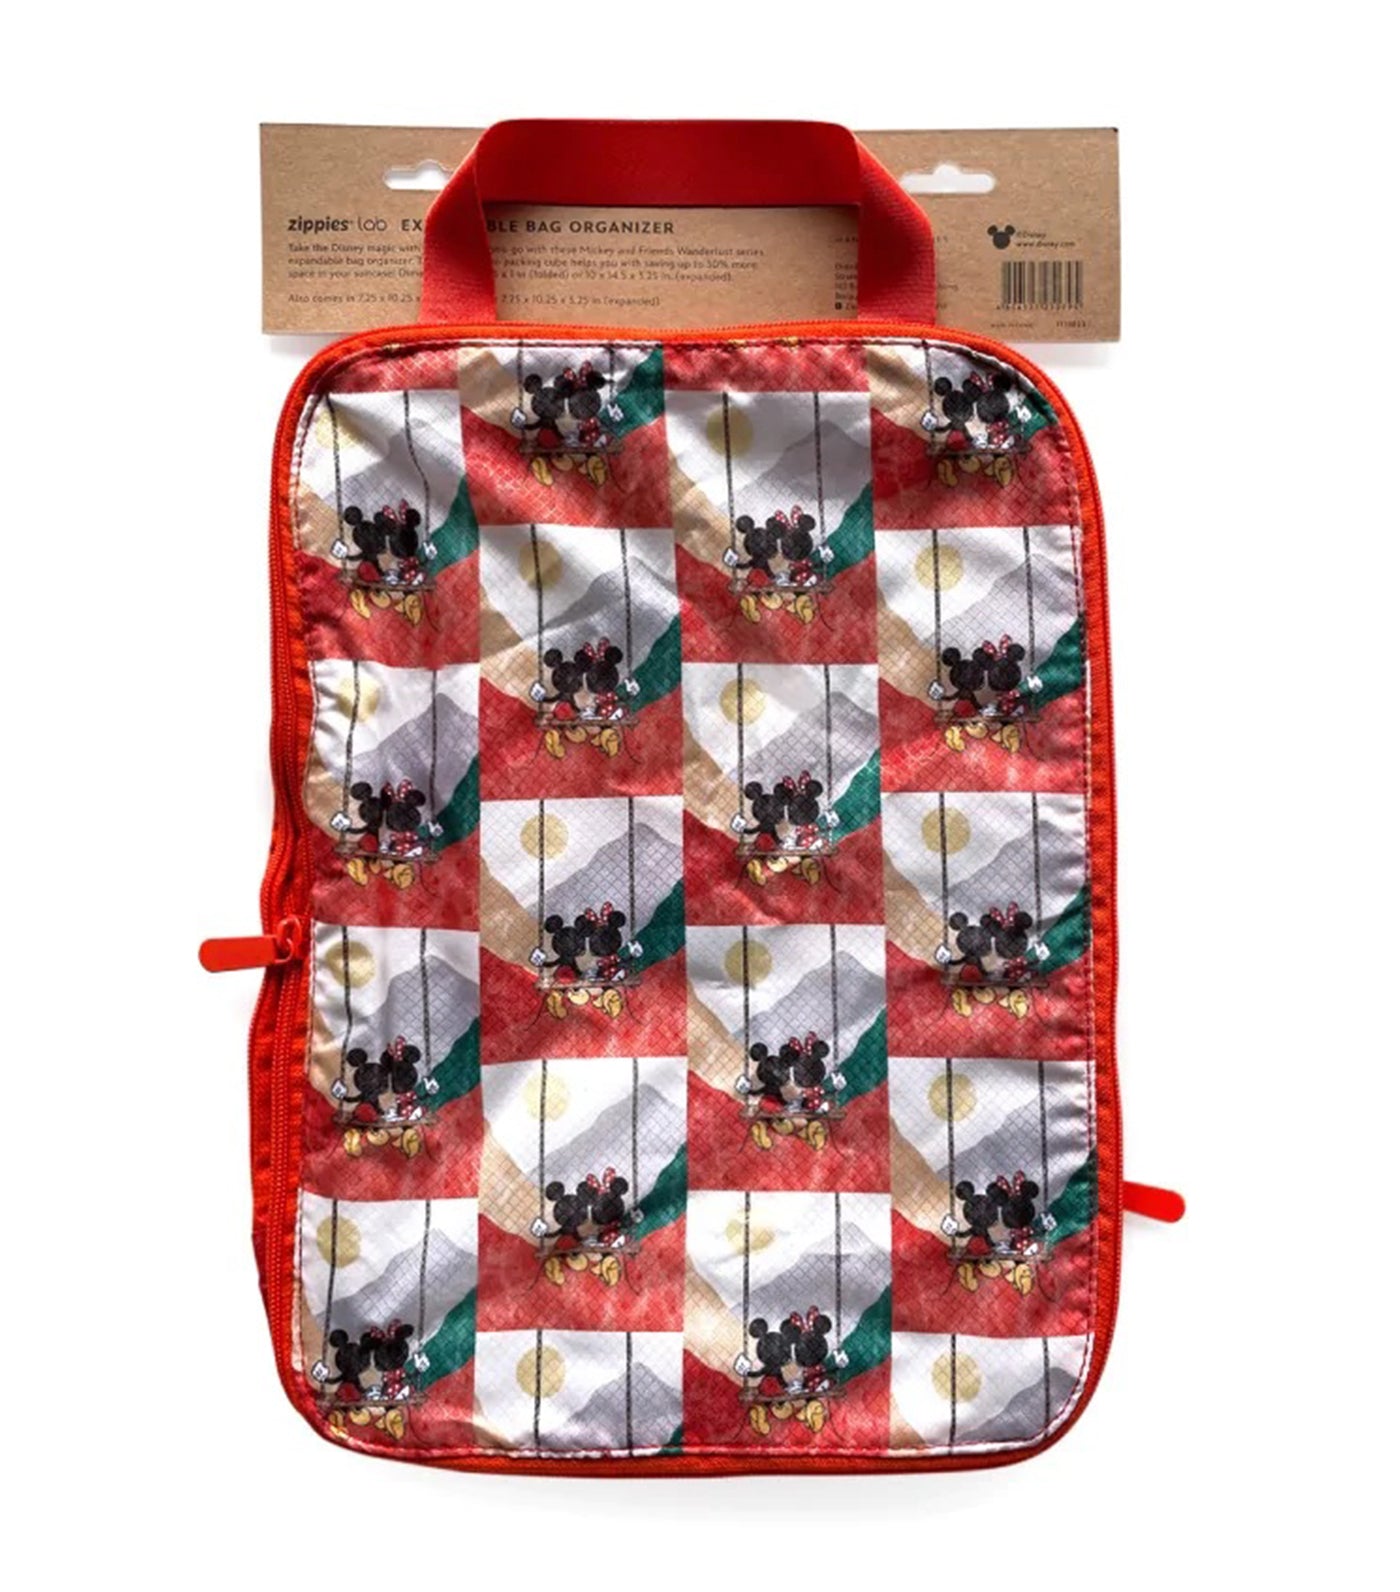 Mickey and Friends Expandable Bag Organizer - Wanderlust